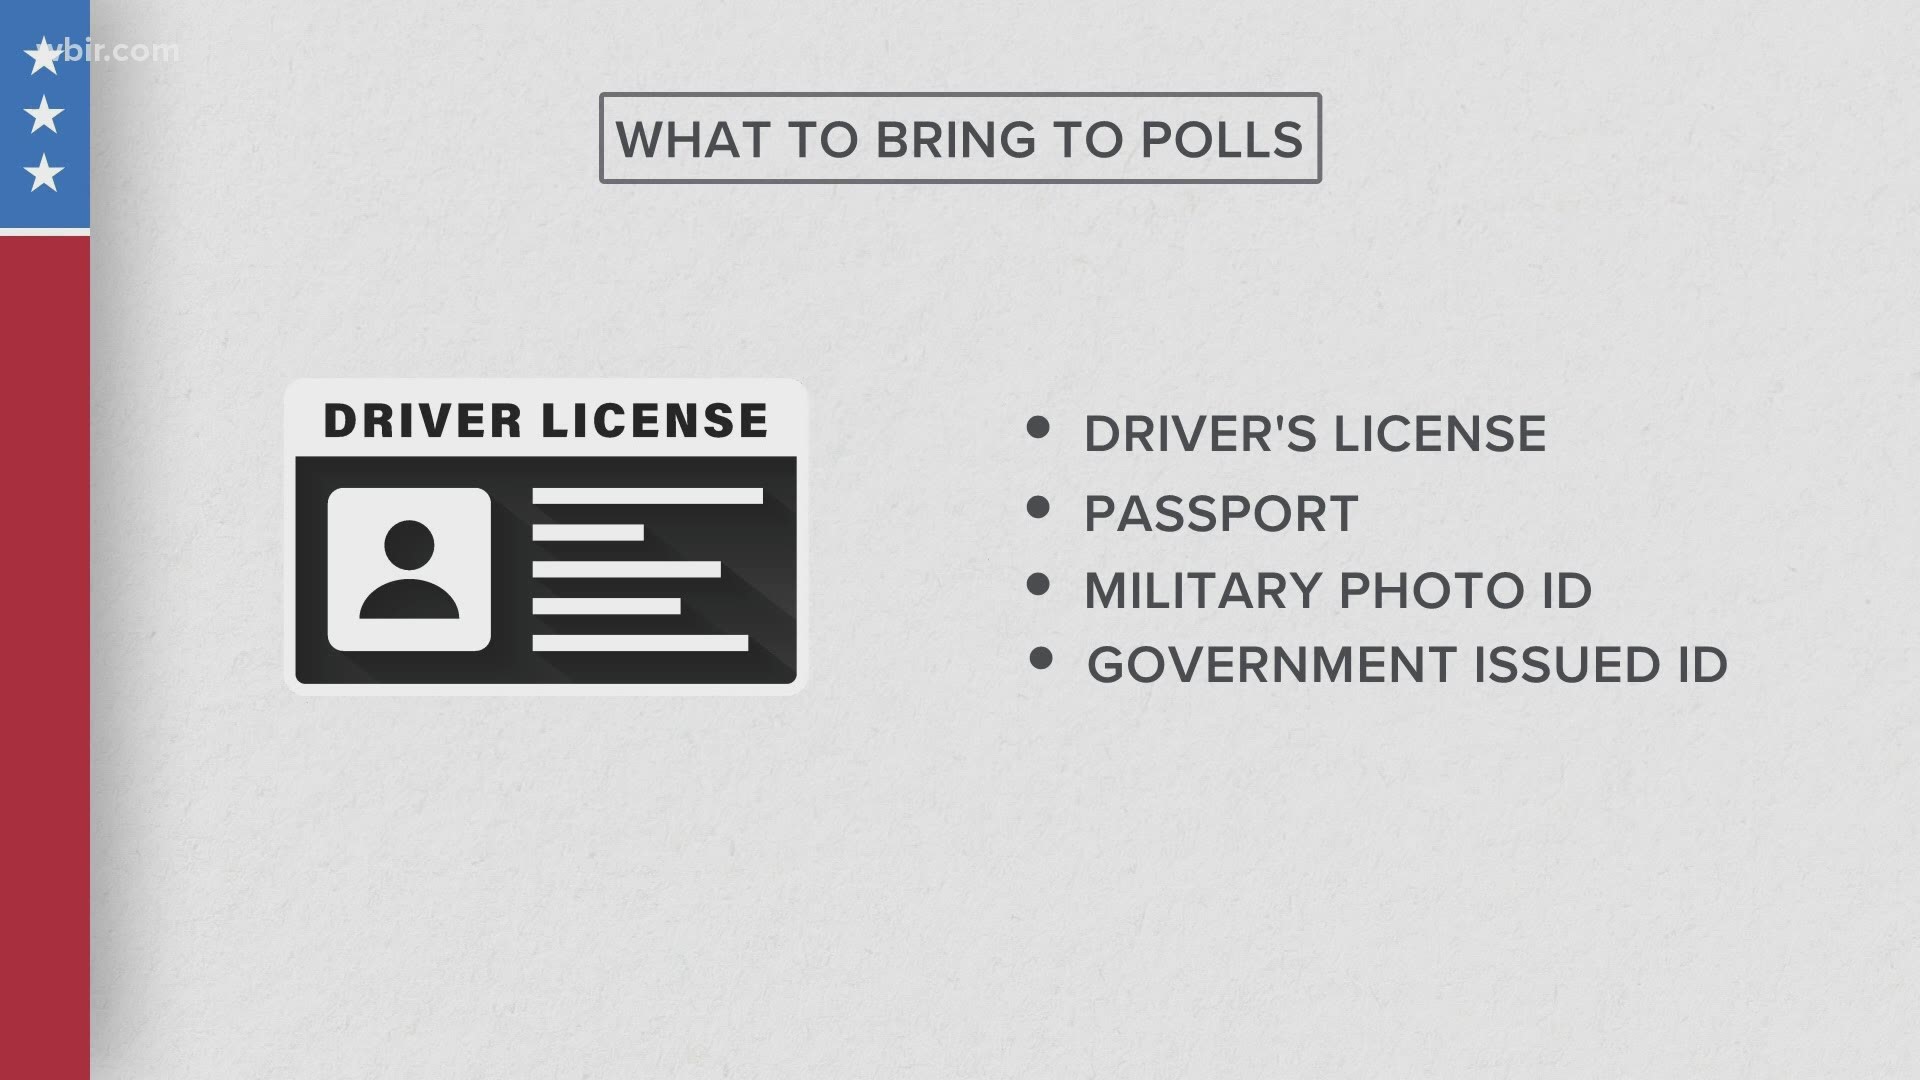 We're answering your election questions including this one: What if you lose your voter ID card?